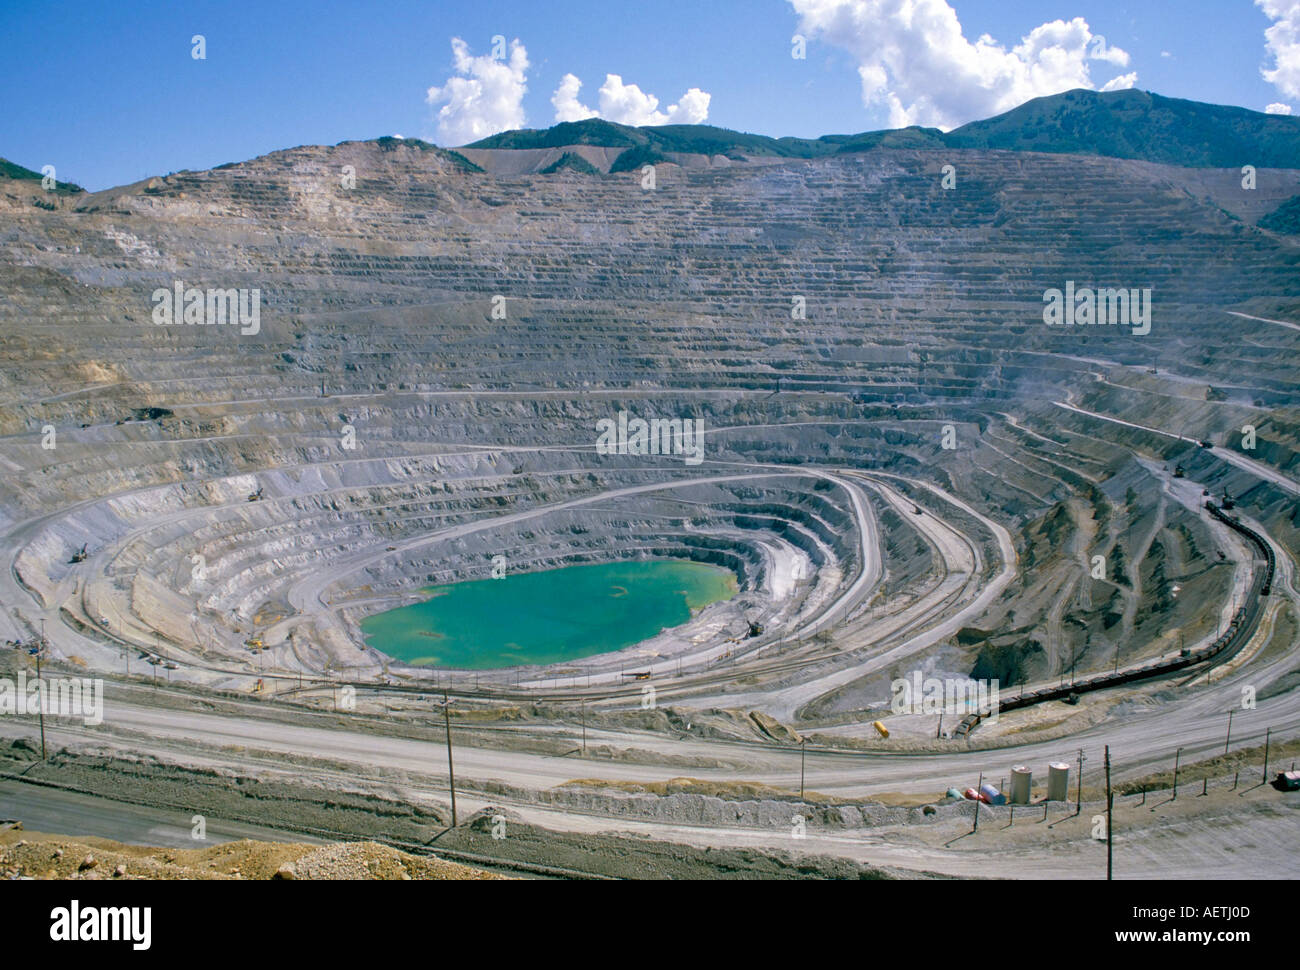 Bingham Canyon Copper Mine Largest Man Made Hole In The World United States Of America North America Stock Photo Alamy